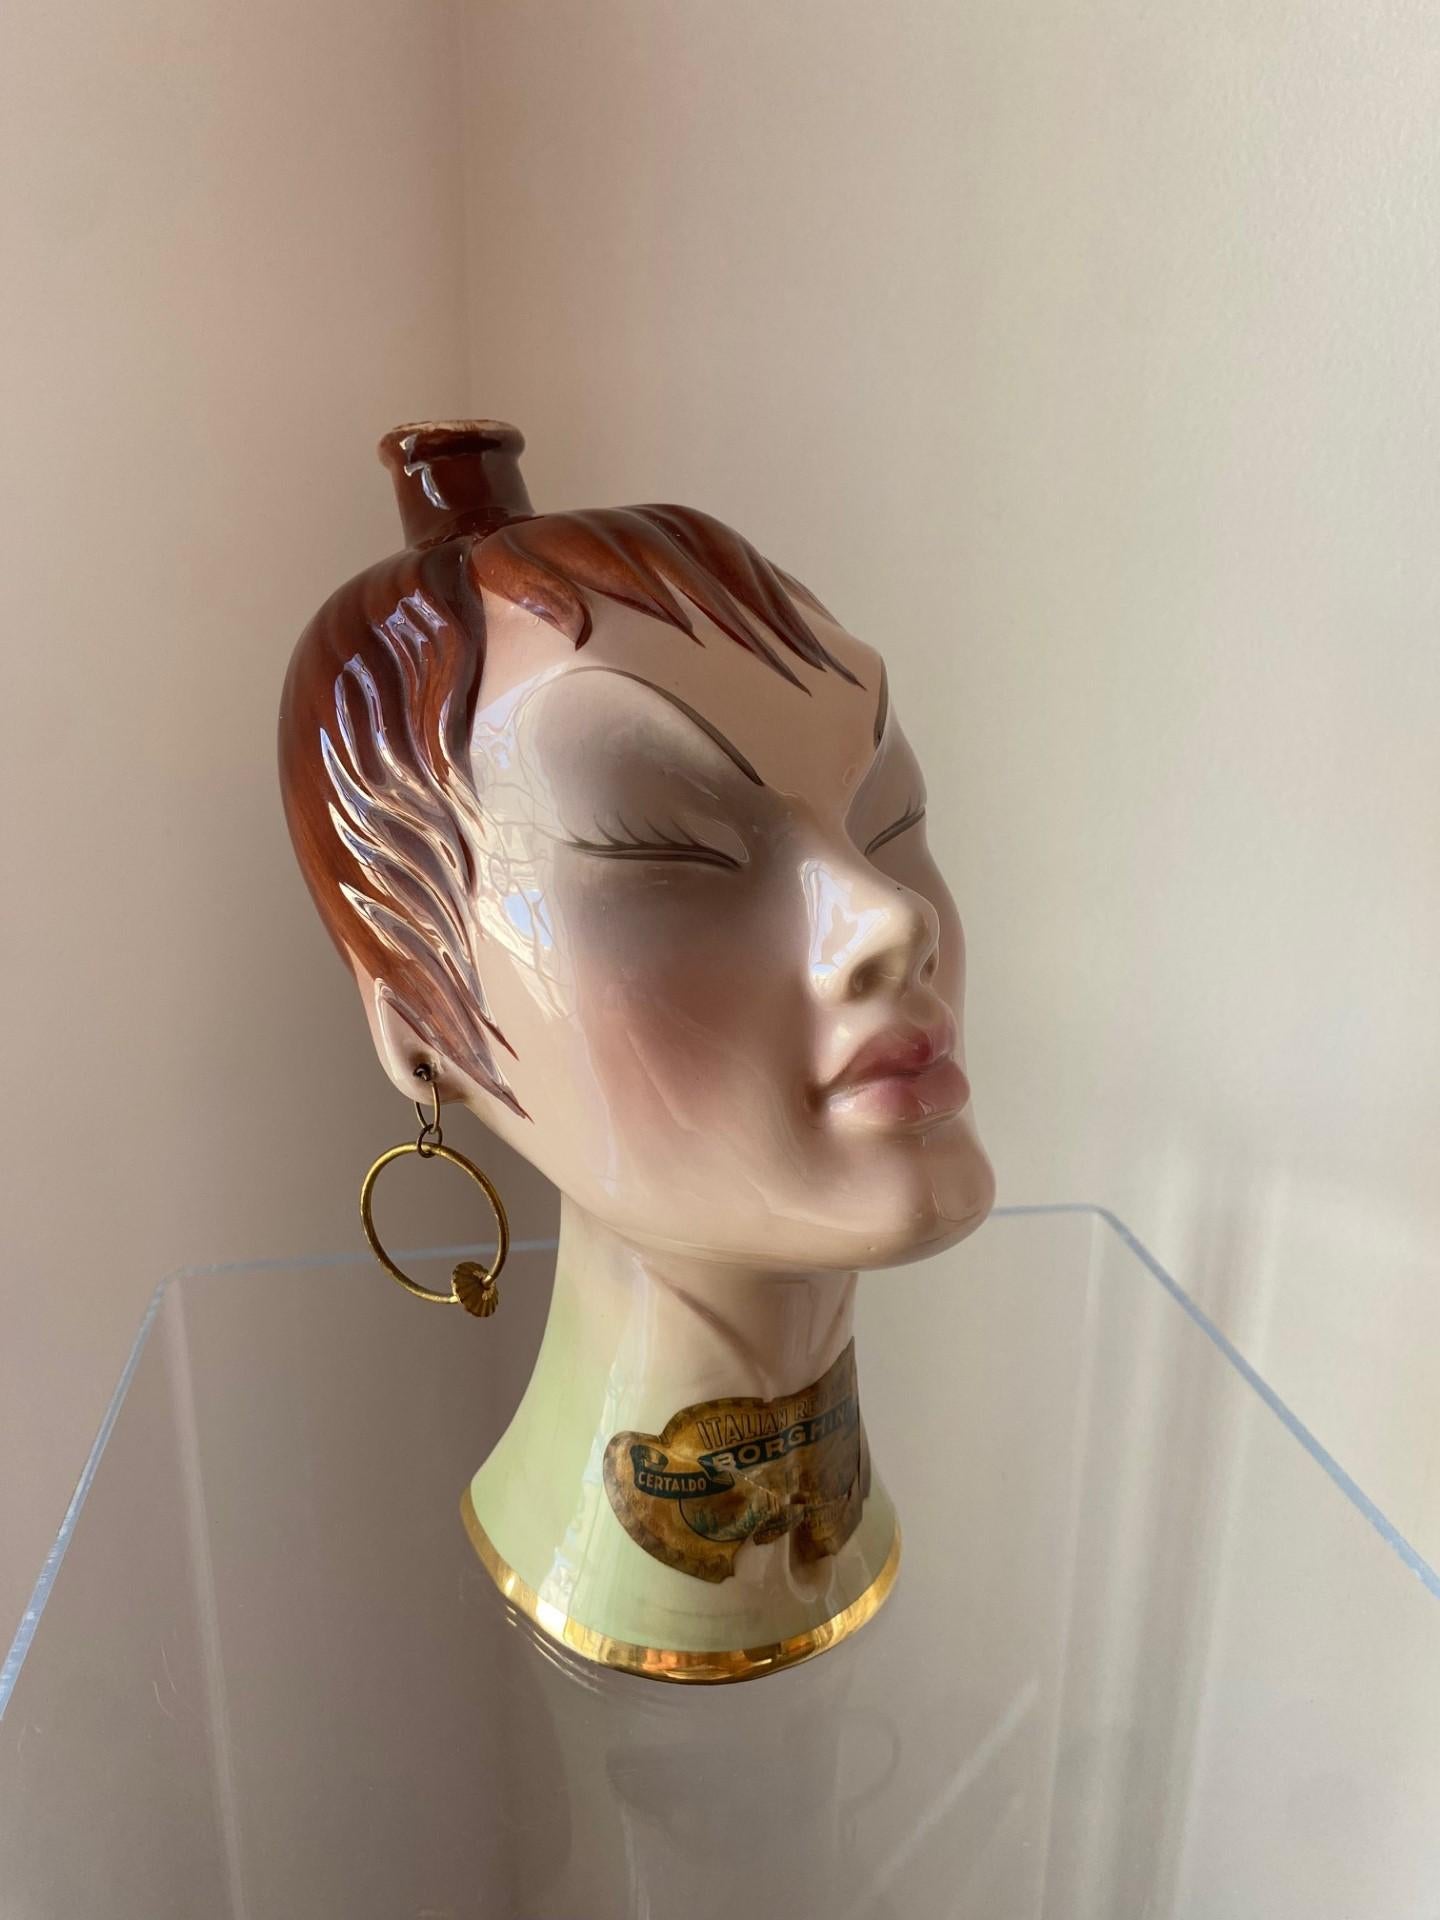 Rare Vintage 1950s Chinoiserie Ceramic Female Sculpture Decanter Italy For Sale 1